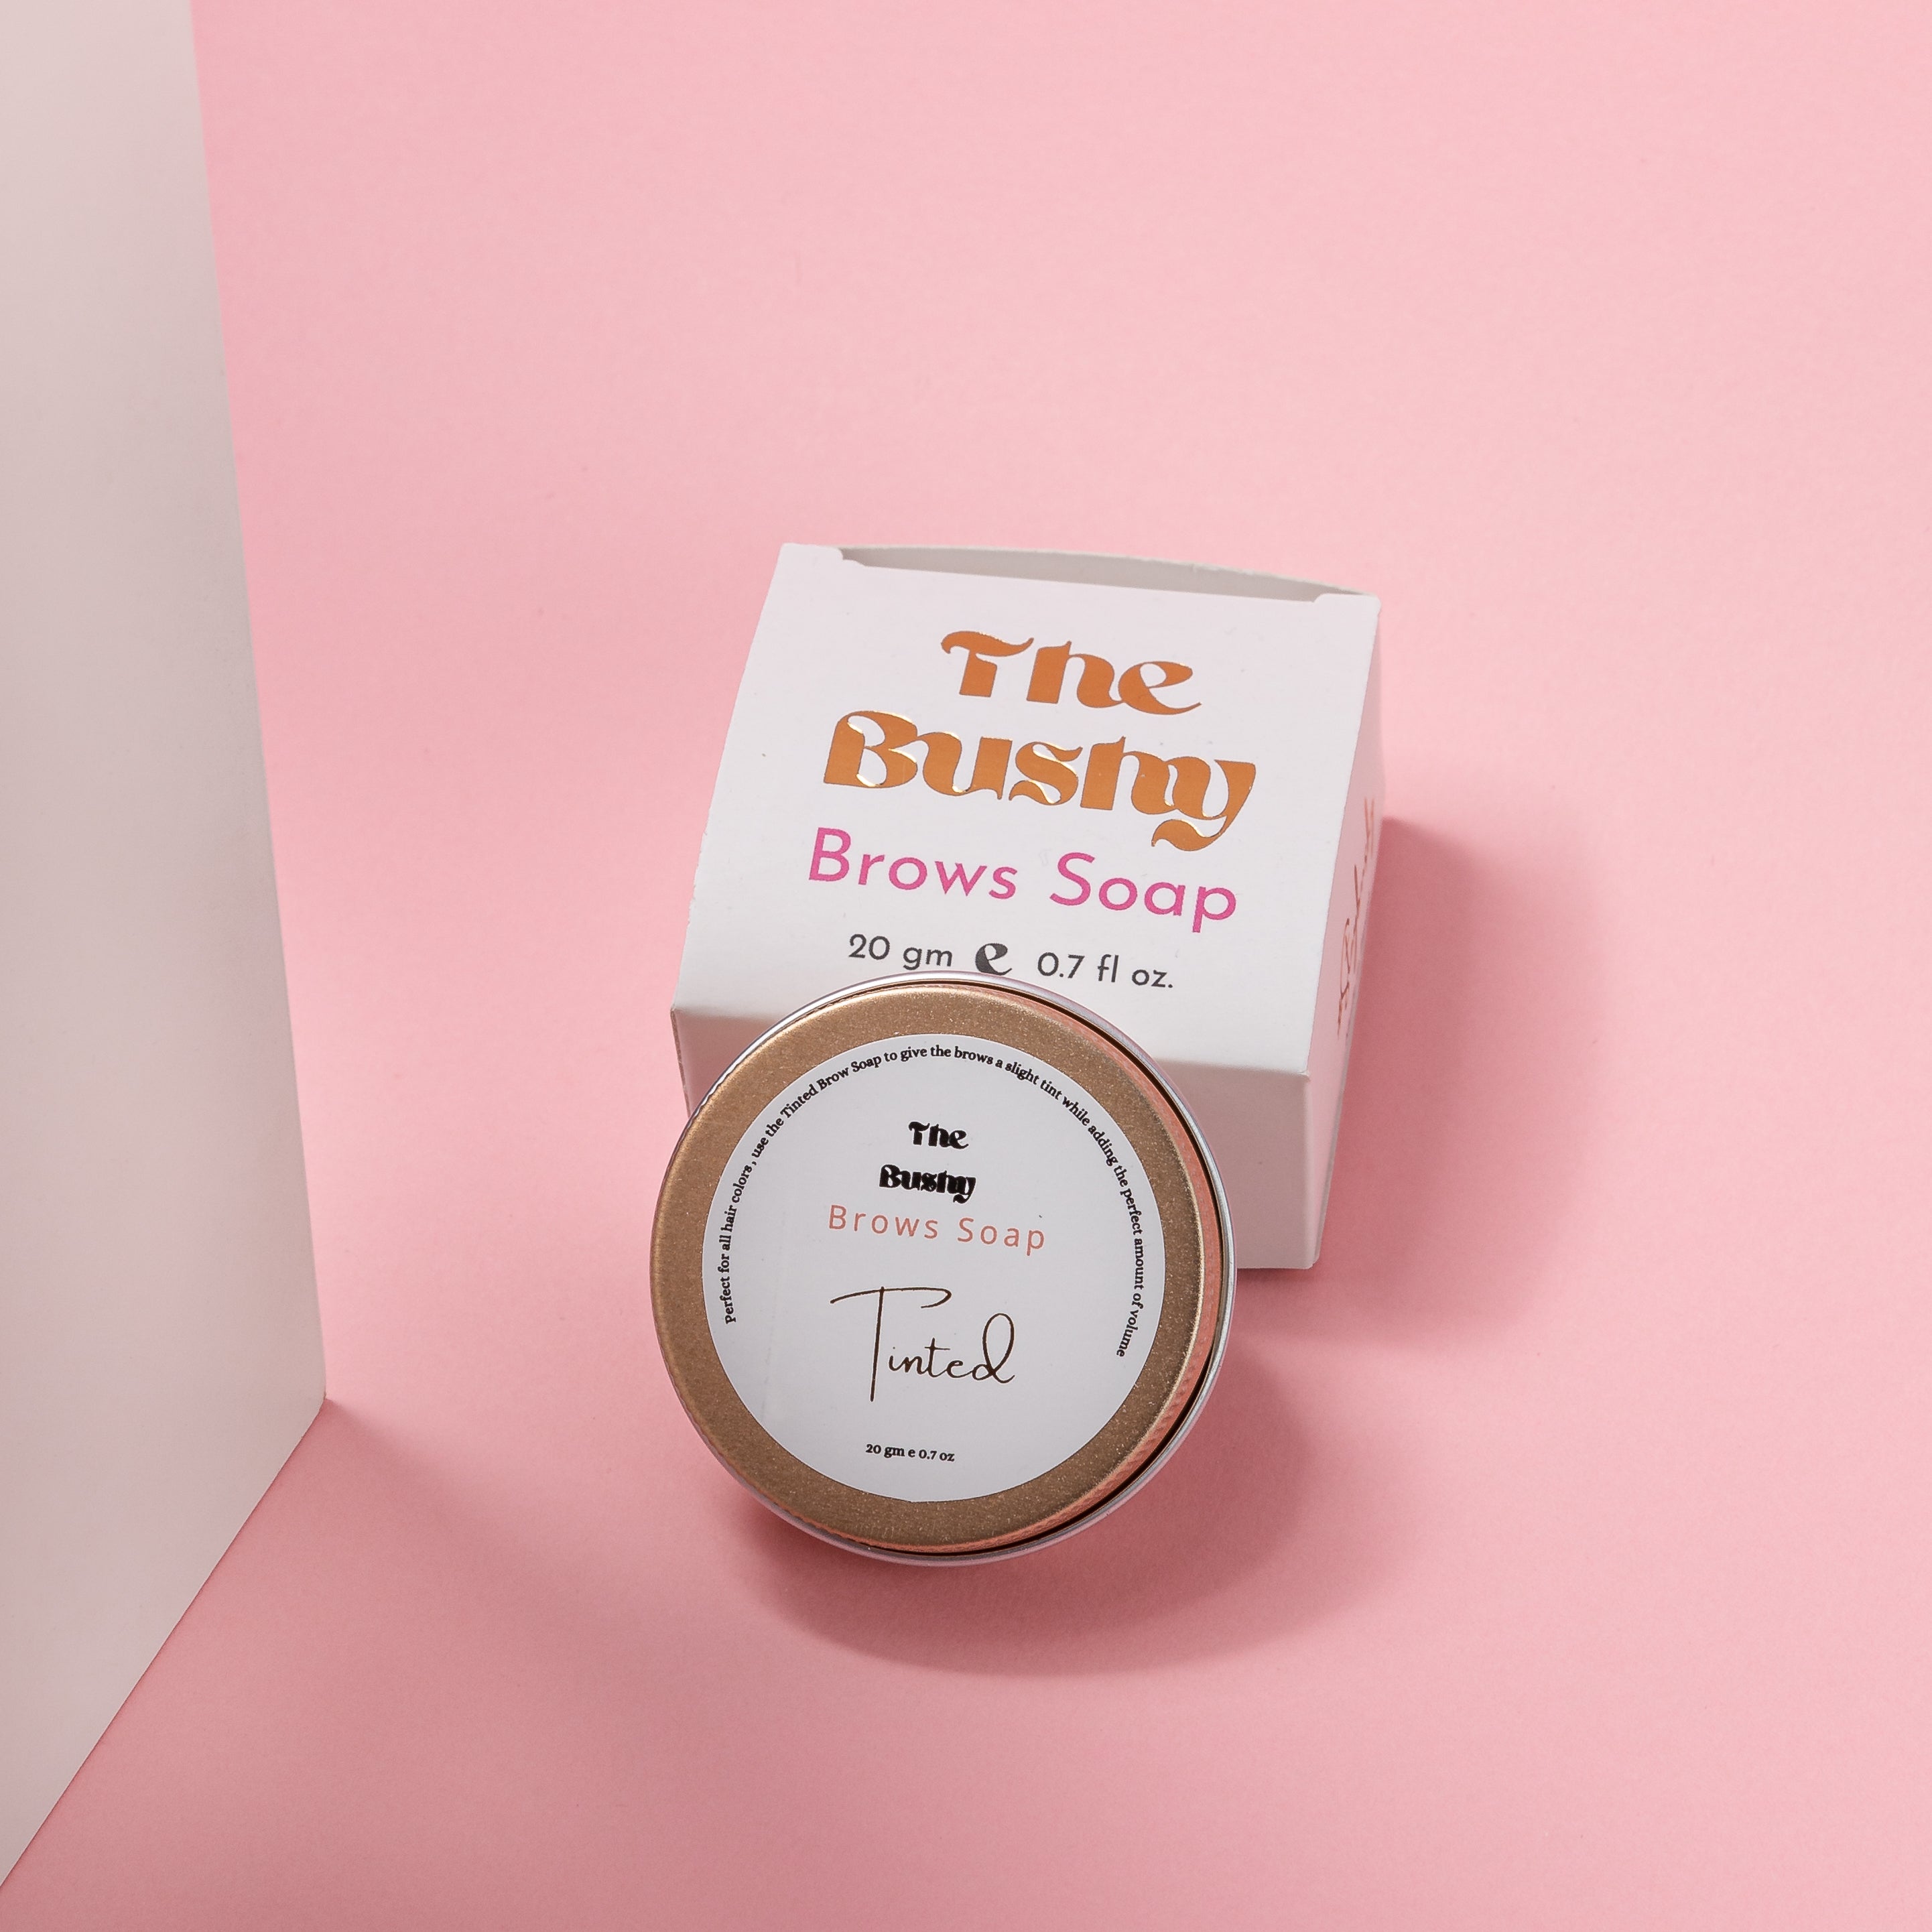 The Tinted Brow Soap